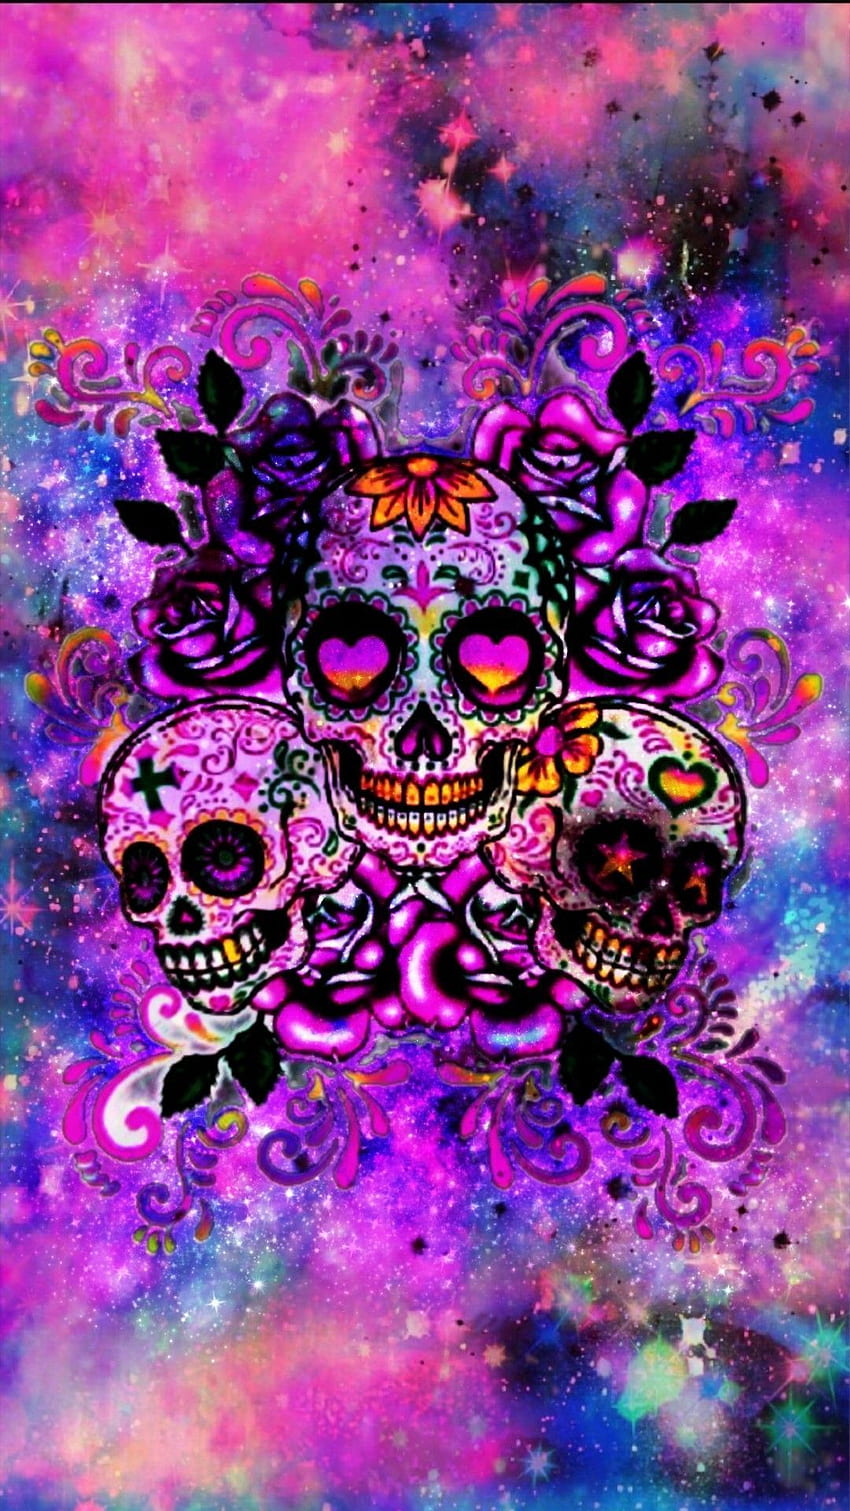 Skull Ghost - Wallpapers For Android & iOS - themexriver